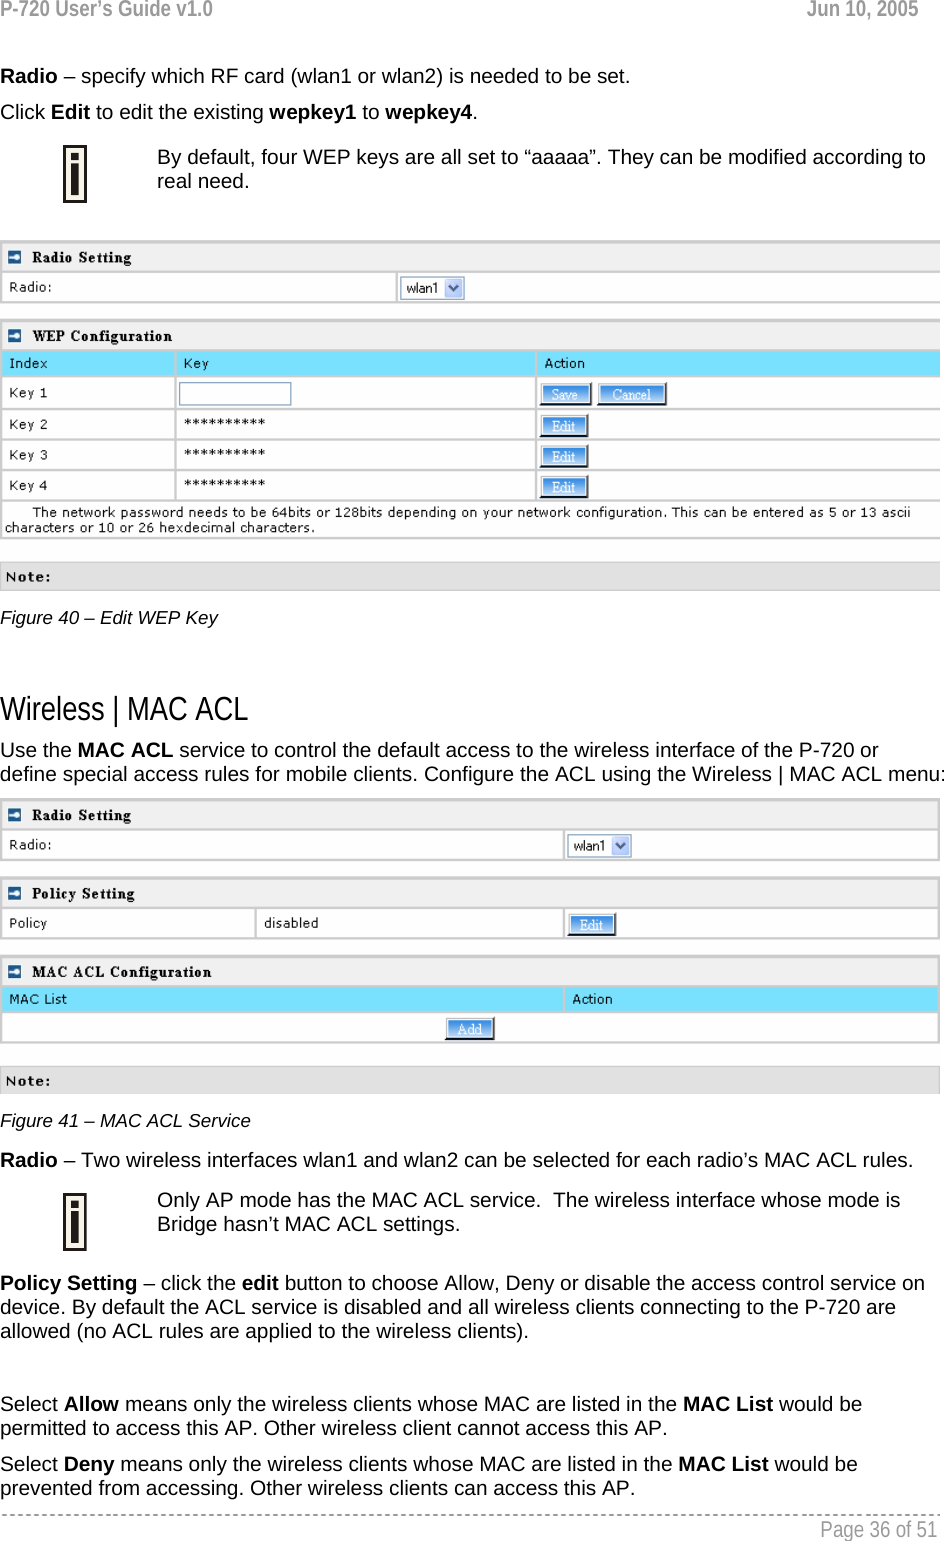 P-720 User’s Guide v1.0  Jun 10, 2005     Page 36 of 51   Radio – specify which RF card (wlan1 or wlan2) is needed to be set. Click Edit to edit the existing wepkey1 to wepkey4.   By default, four WEP keys are all set to “aaaaa”. They can be modified according to real need.    Figure 40 – Edit WEP Key  Wireless | MAC ACL Use the MAC ACL service to control the default access to the wireless interface of the P-720 or define special access rules for mobile clients. Configure the ACL using the Wireless | MAC ACL menu:  Figure 41 – MAC ACL Service Radio – Two wireless interfaces wlan1 and wlan2 can be selected for each radio’s MAC ACL rules.   Only AP mode has the MAC ACL service.  The wireless interface whose mode is Bridge hasn’t MAC ACL settings. Policy Setting – click the edit button to choose Allow, Deny or disable the access control service on device. By default the ACL service is disabled and all wireless clients connecting to the P-720 are allowed (no ACL rules are applied to the wireless clients).  Select Allow means only the wireless clients whose MAC are listed in the MAC List would be permitted to access this AP. Other wireless client cannot access this AP. Select Deny means only the wireless clients whose MAC are listed in the MAC List would be prevented from accessing. Other wireless clients can access this AP.   